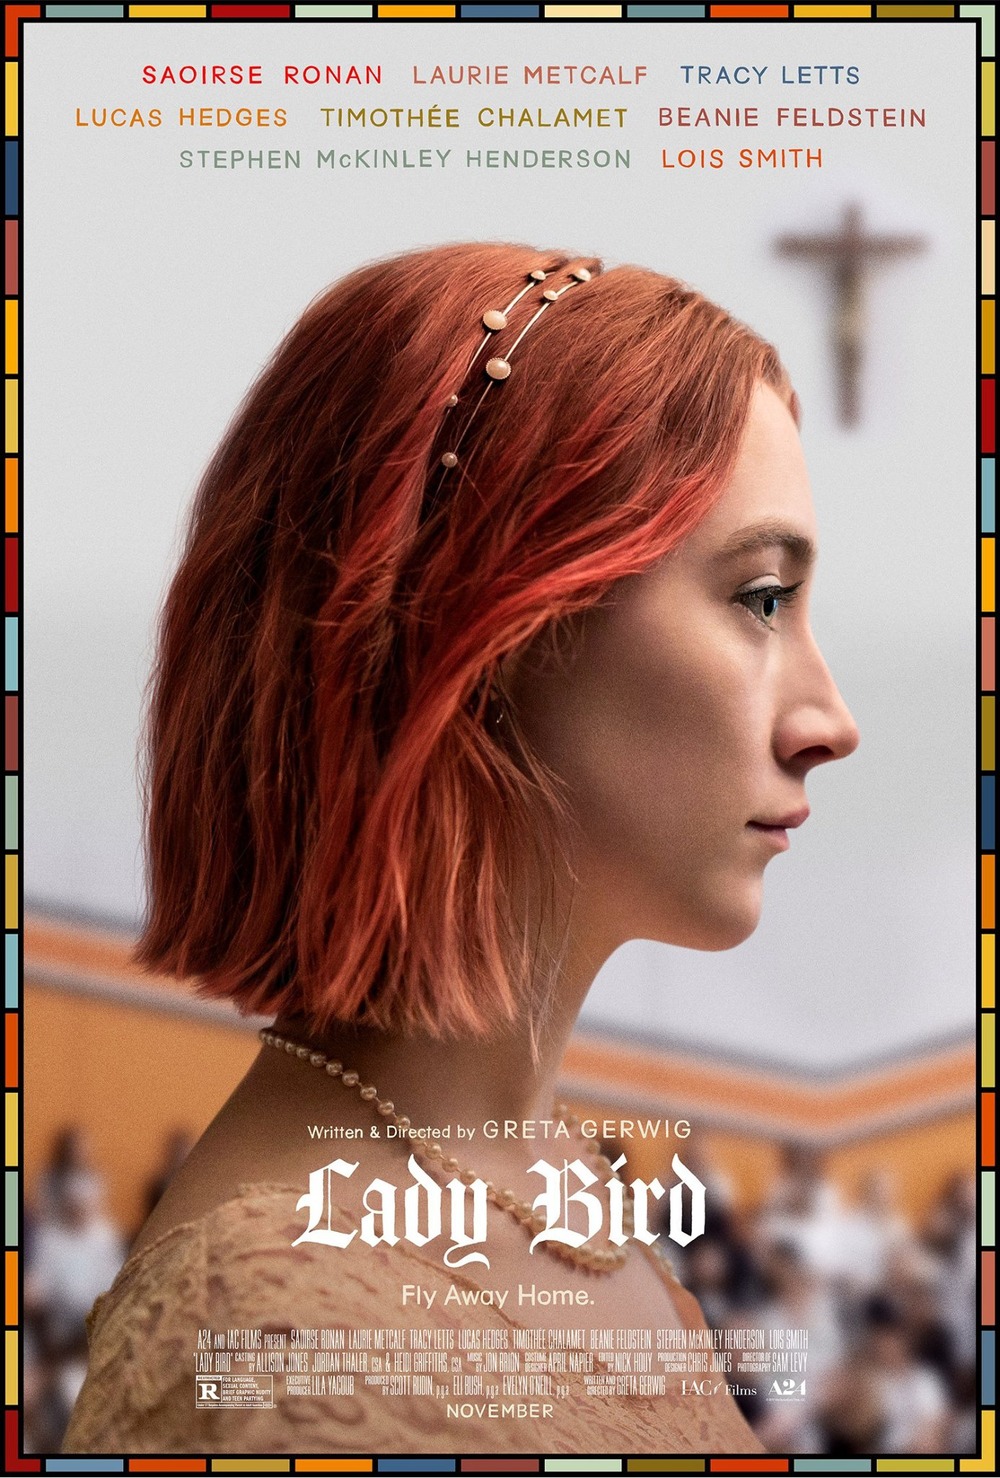 Geek insider, geekinsider, geekinsider. Com,, lady bird: the film that broke rotten tomatoes, entertainment